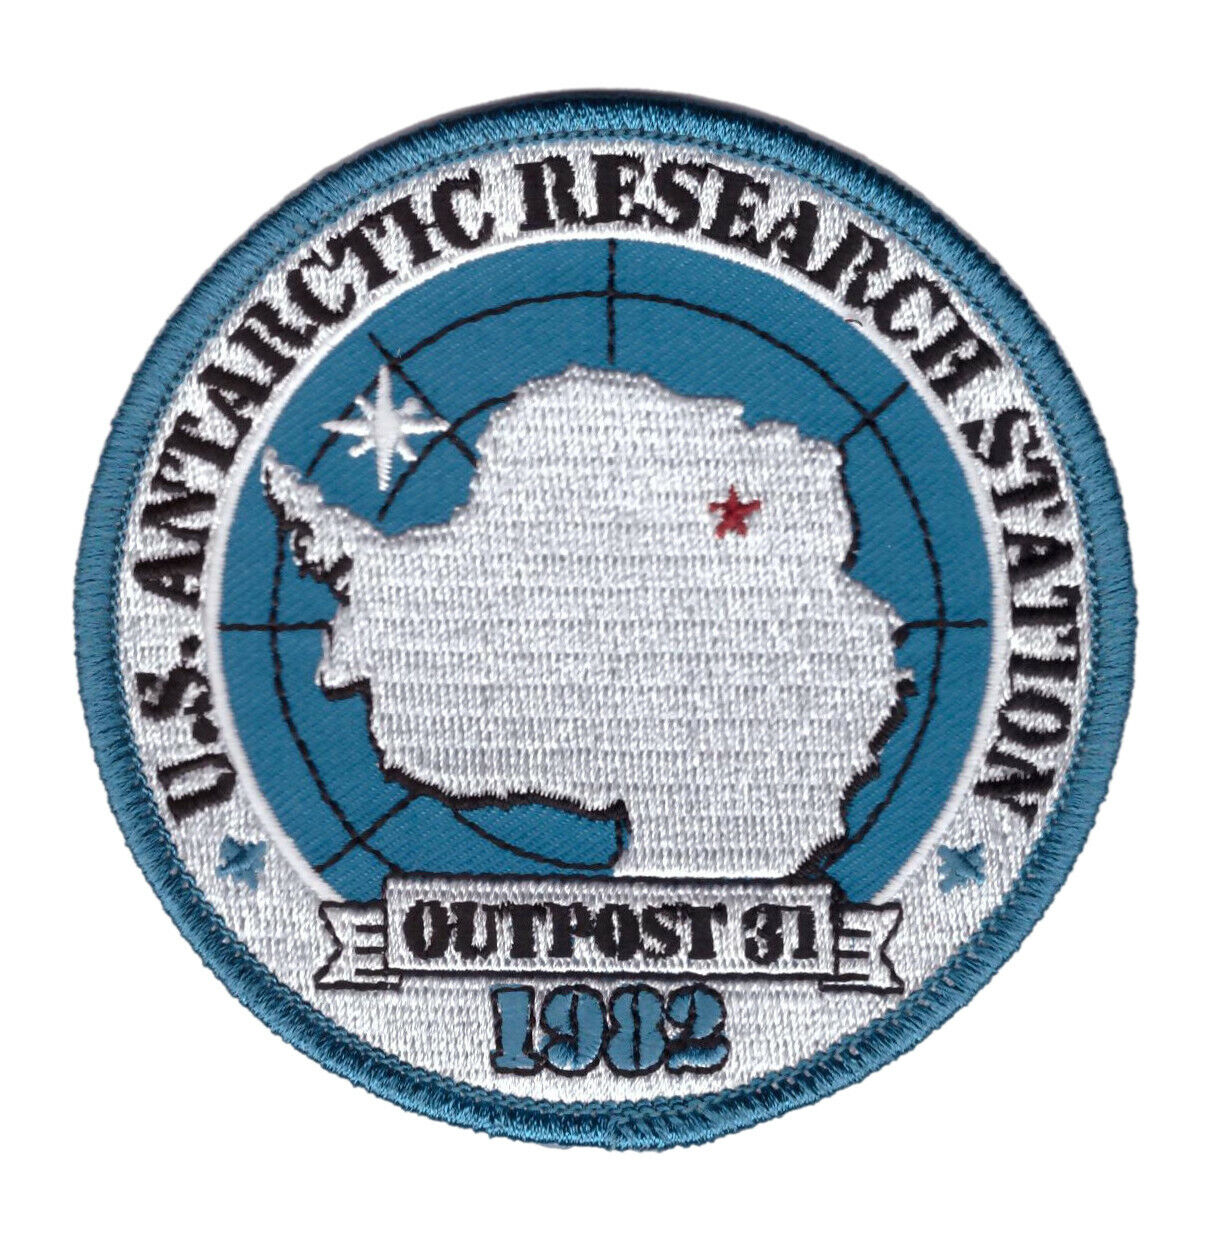 Antarctic Research Station Outpost 31 Horror Movie Collectible Patch